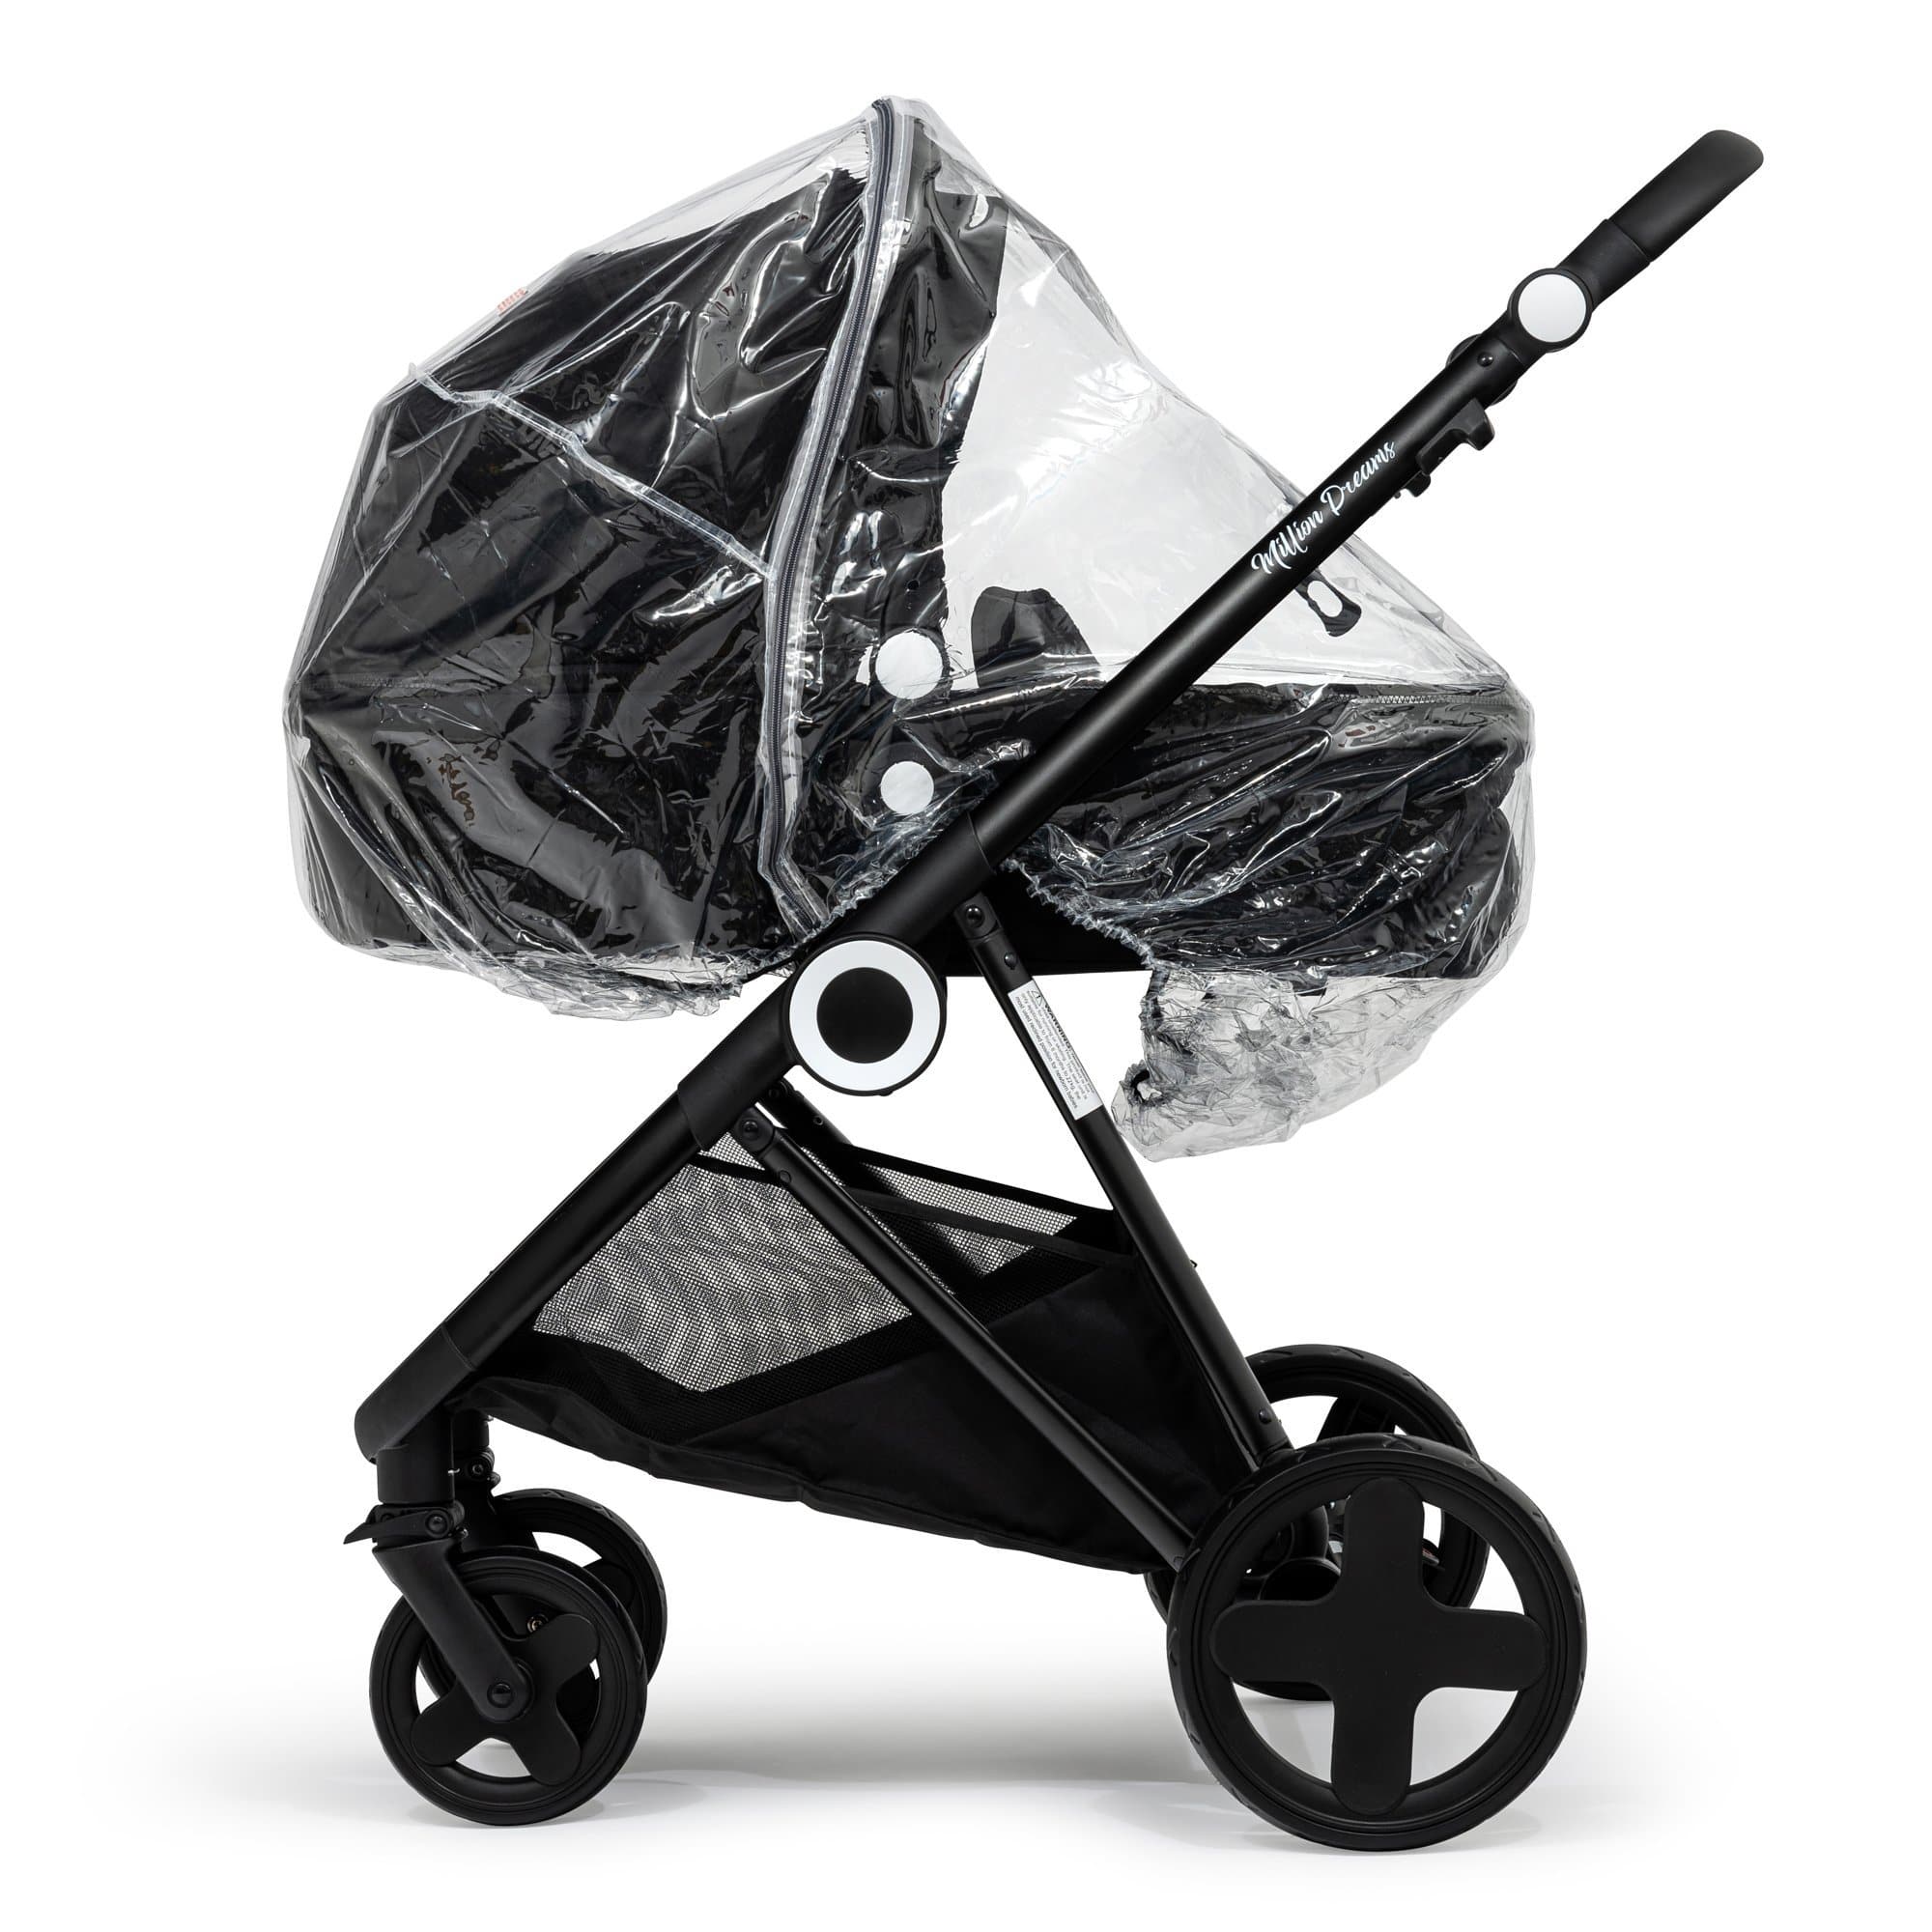 2 in 1 Rain Cover Compatible with Nuna - Fits All Models - For Your Little One